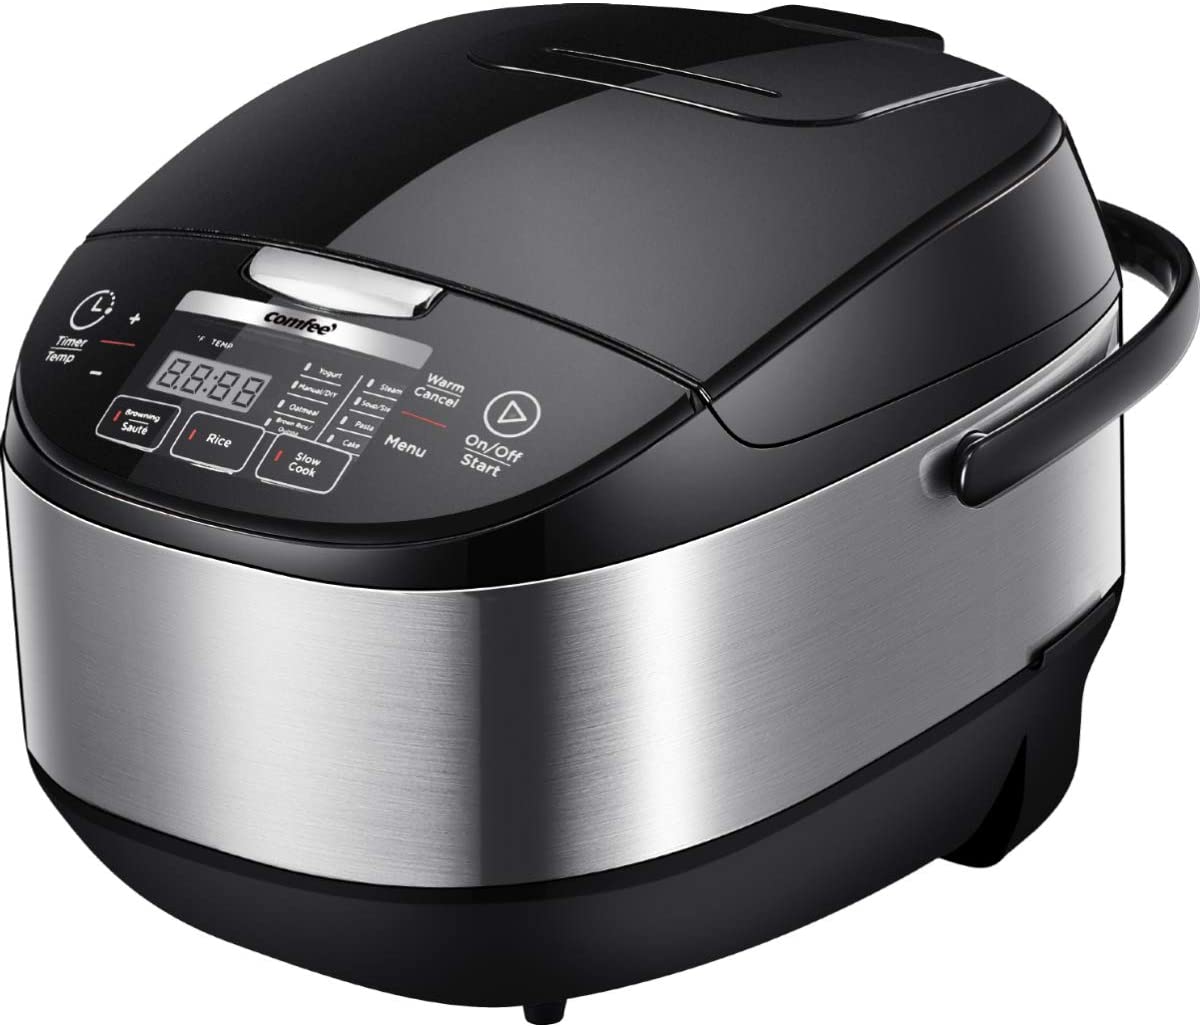 COMFEE LED User-Friendly Rice Cooker, 10-Cup